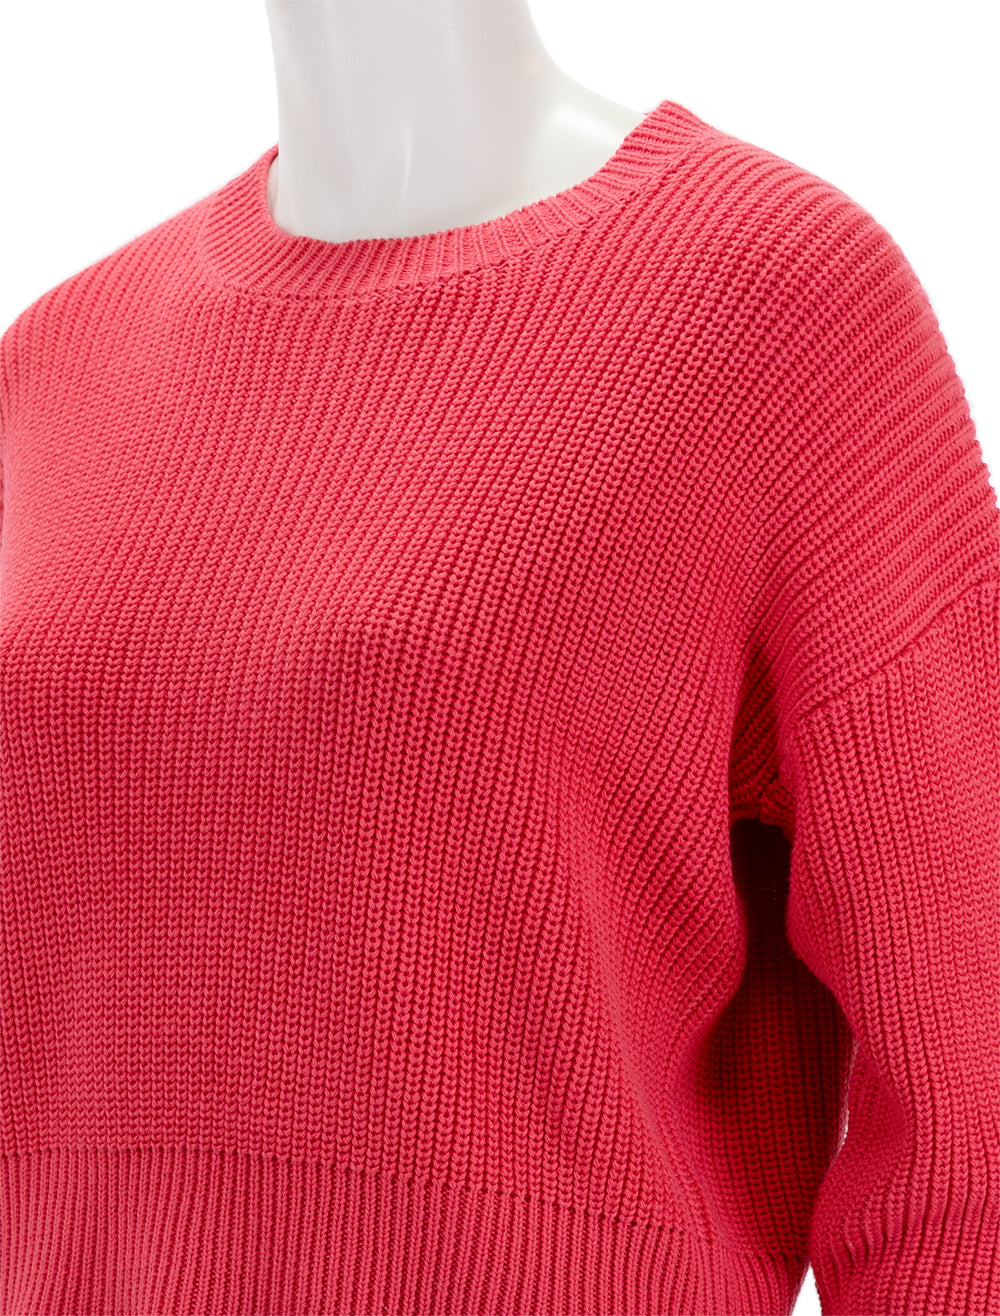 Close-up view of Self Contrast's siobhan sweater in french rose.